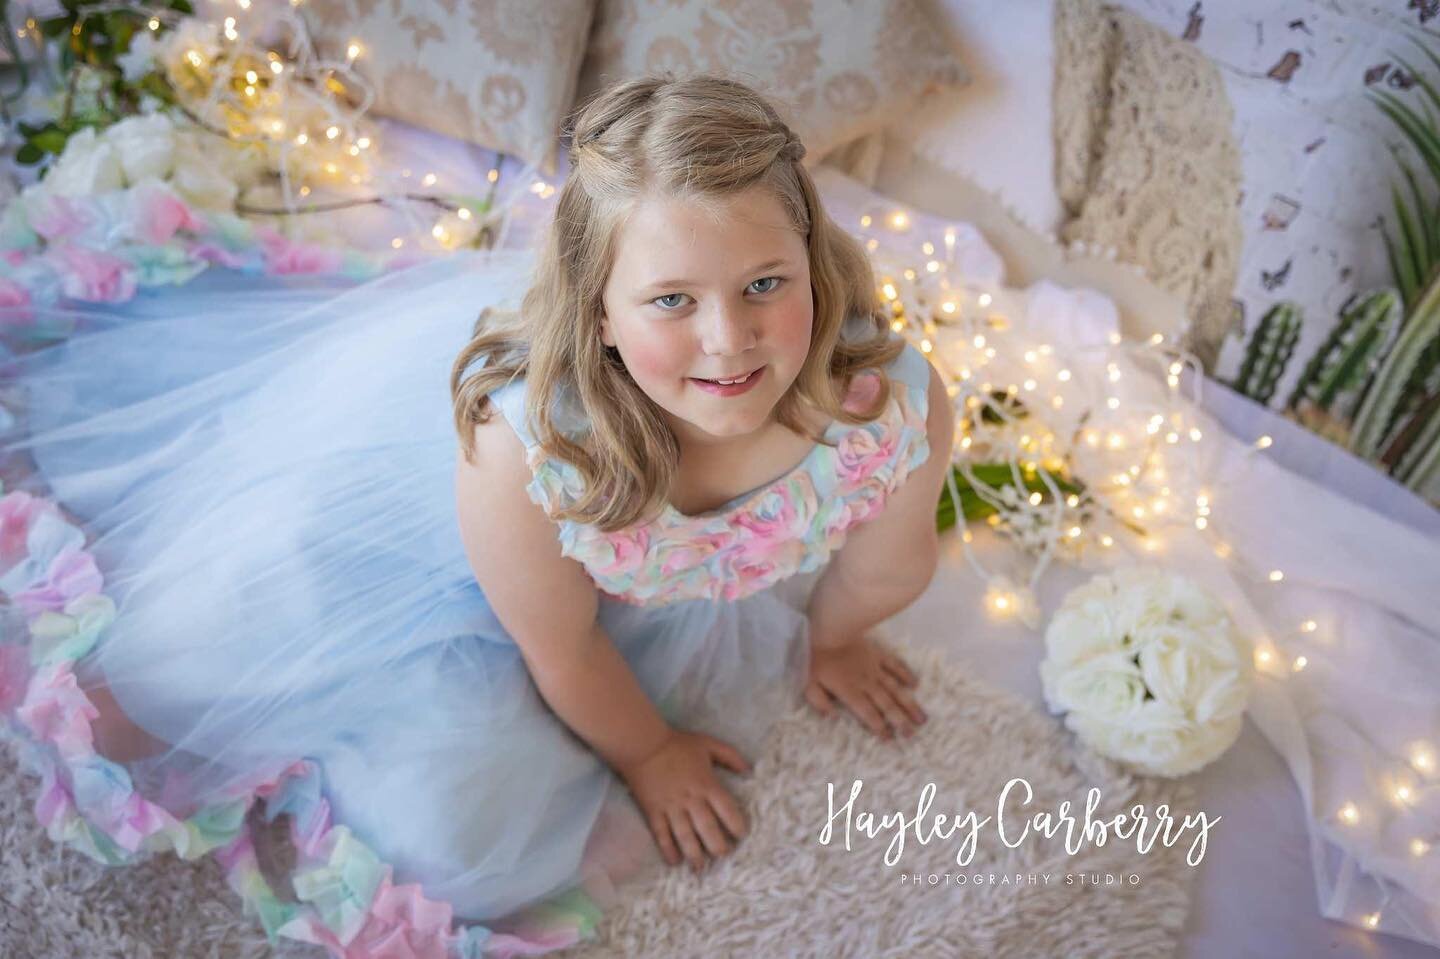 Only a few more days until these Mini Sessions on the weekend, I am really looking forward to seeing everyone :)

There are a few more sessions left, for more information: https://www.hayleycarberry.com/mini-sessions